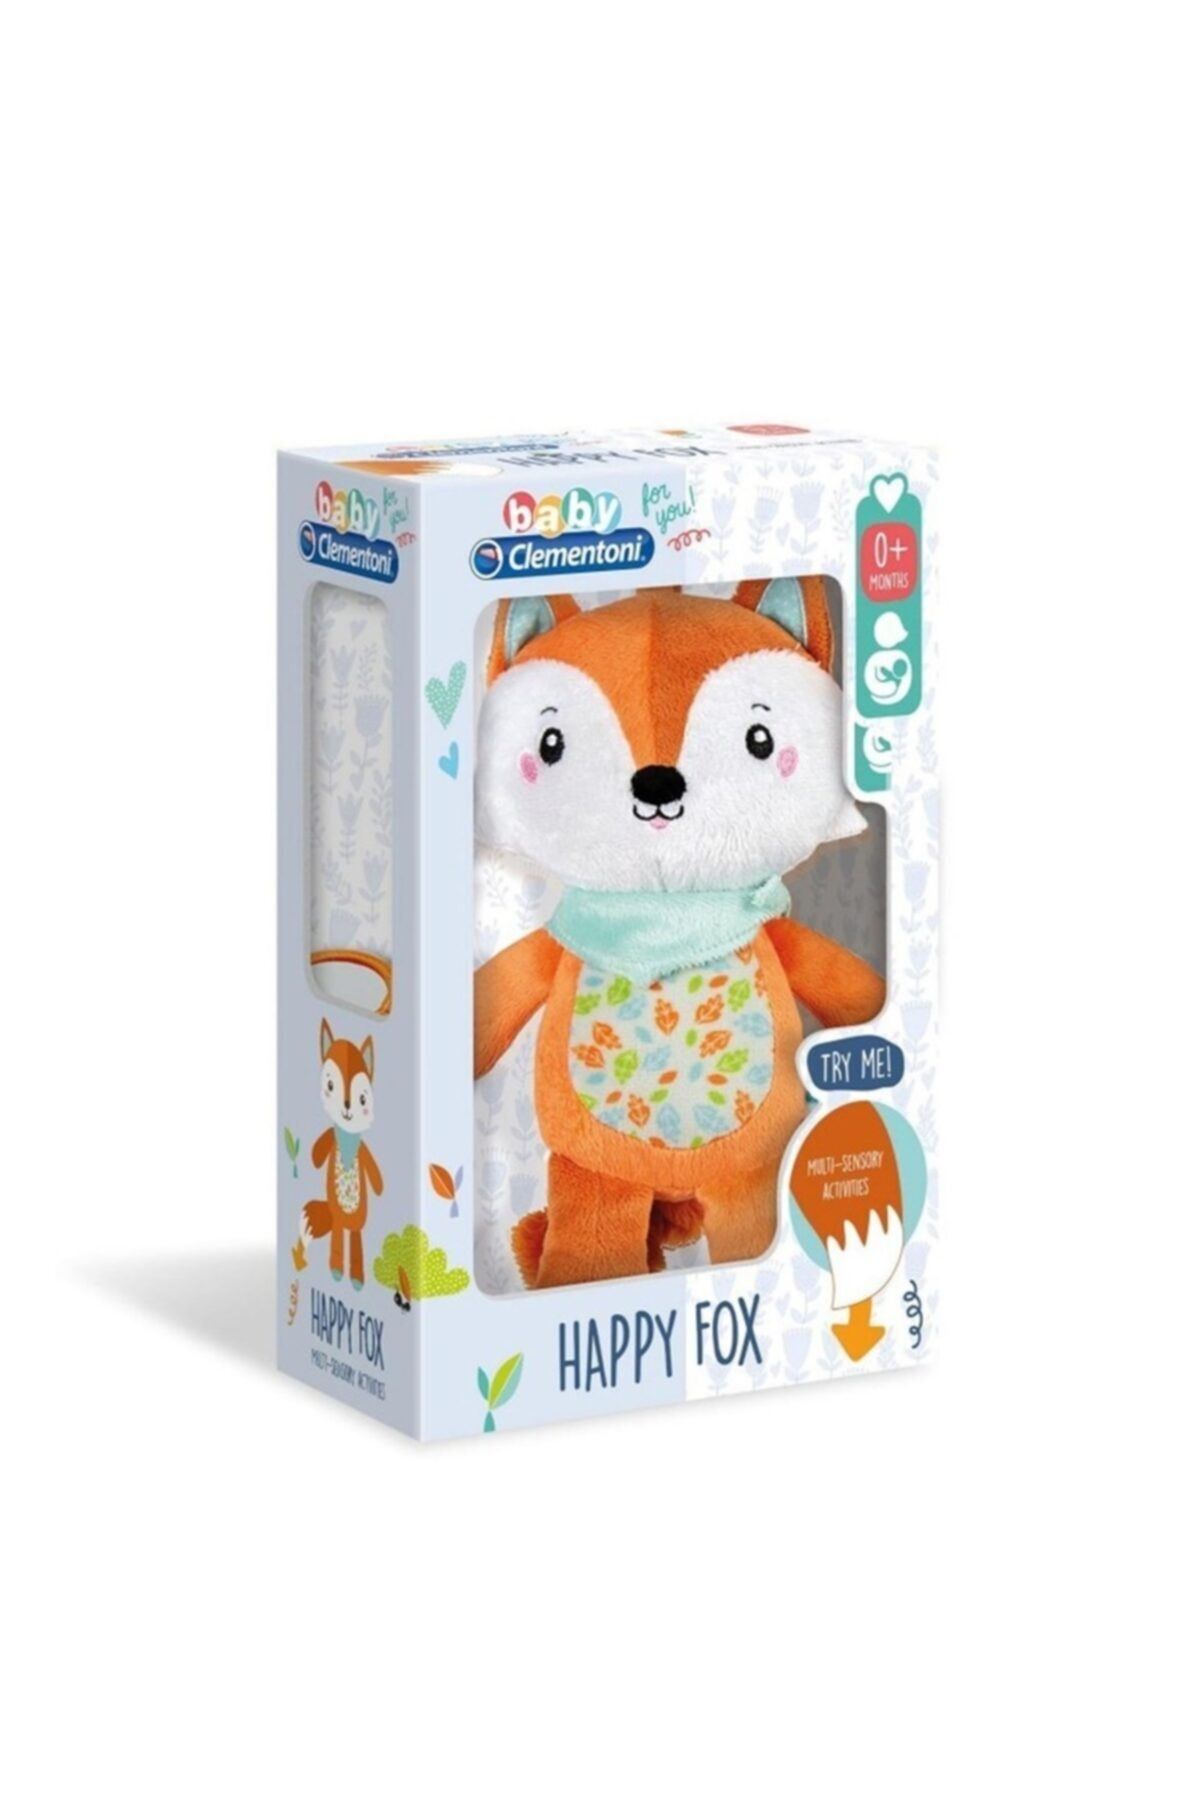 Clementoni Baby Toy Activated Push Fox Cle-17271 6535.00005